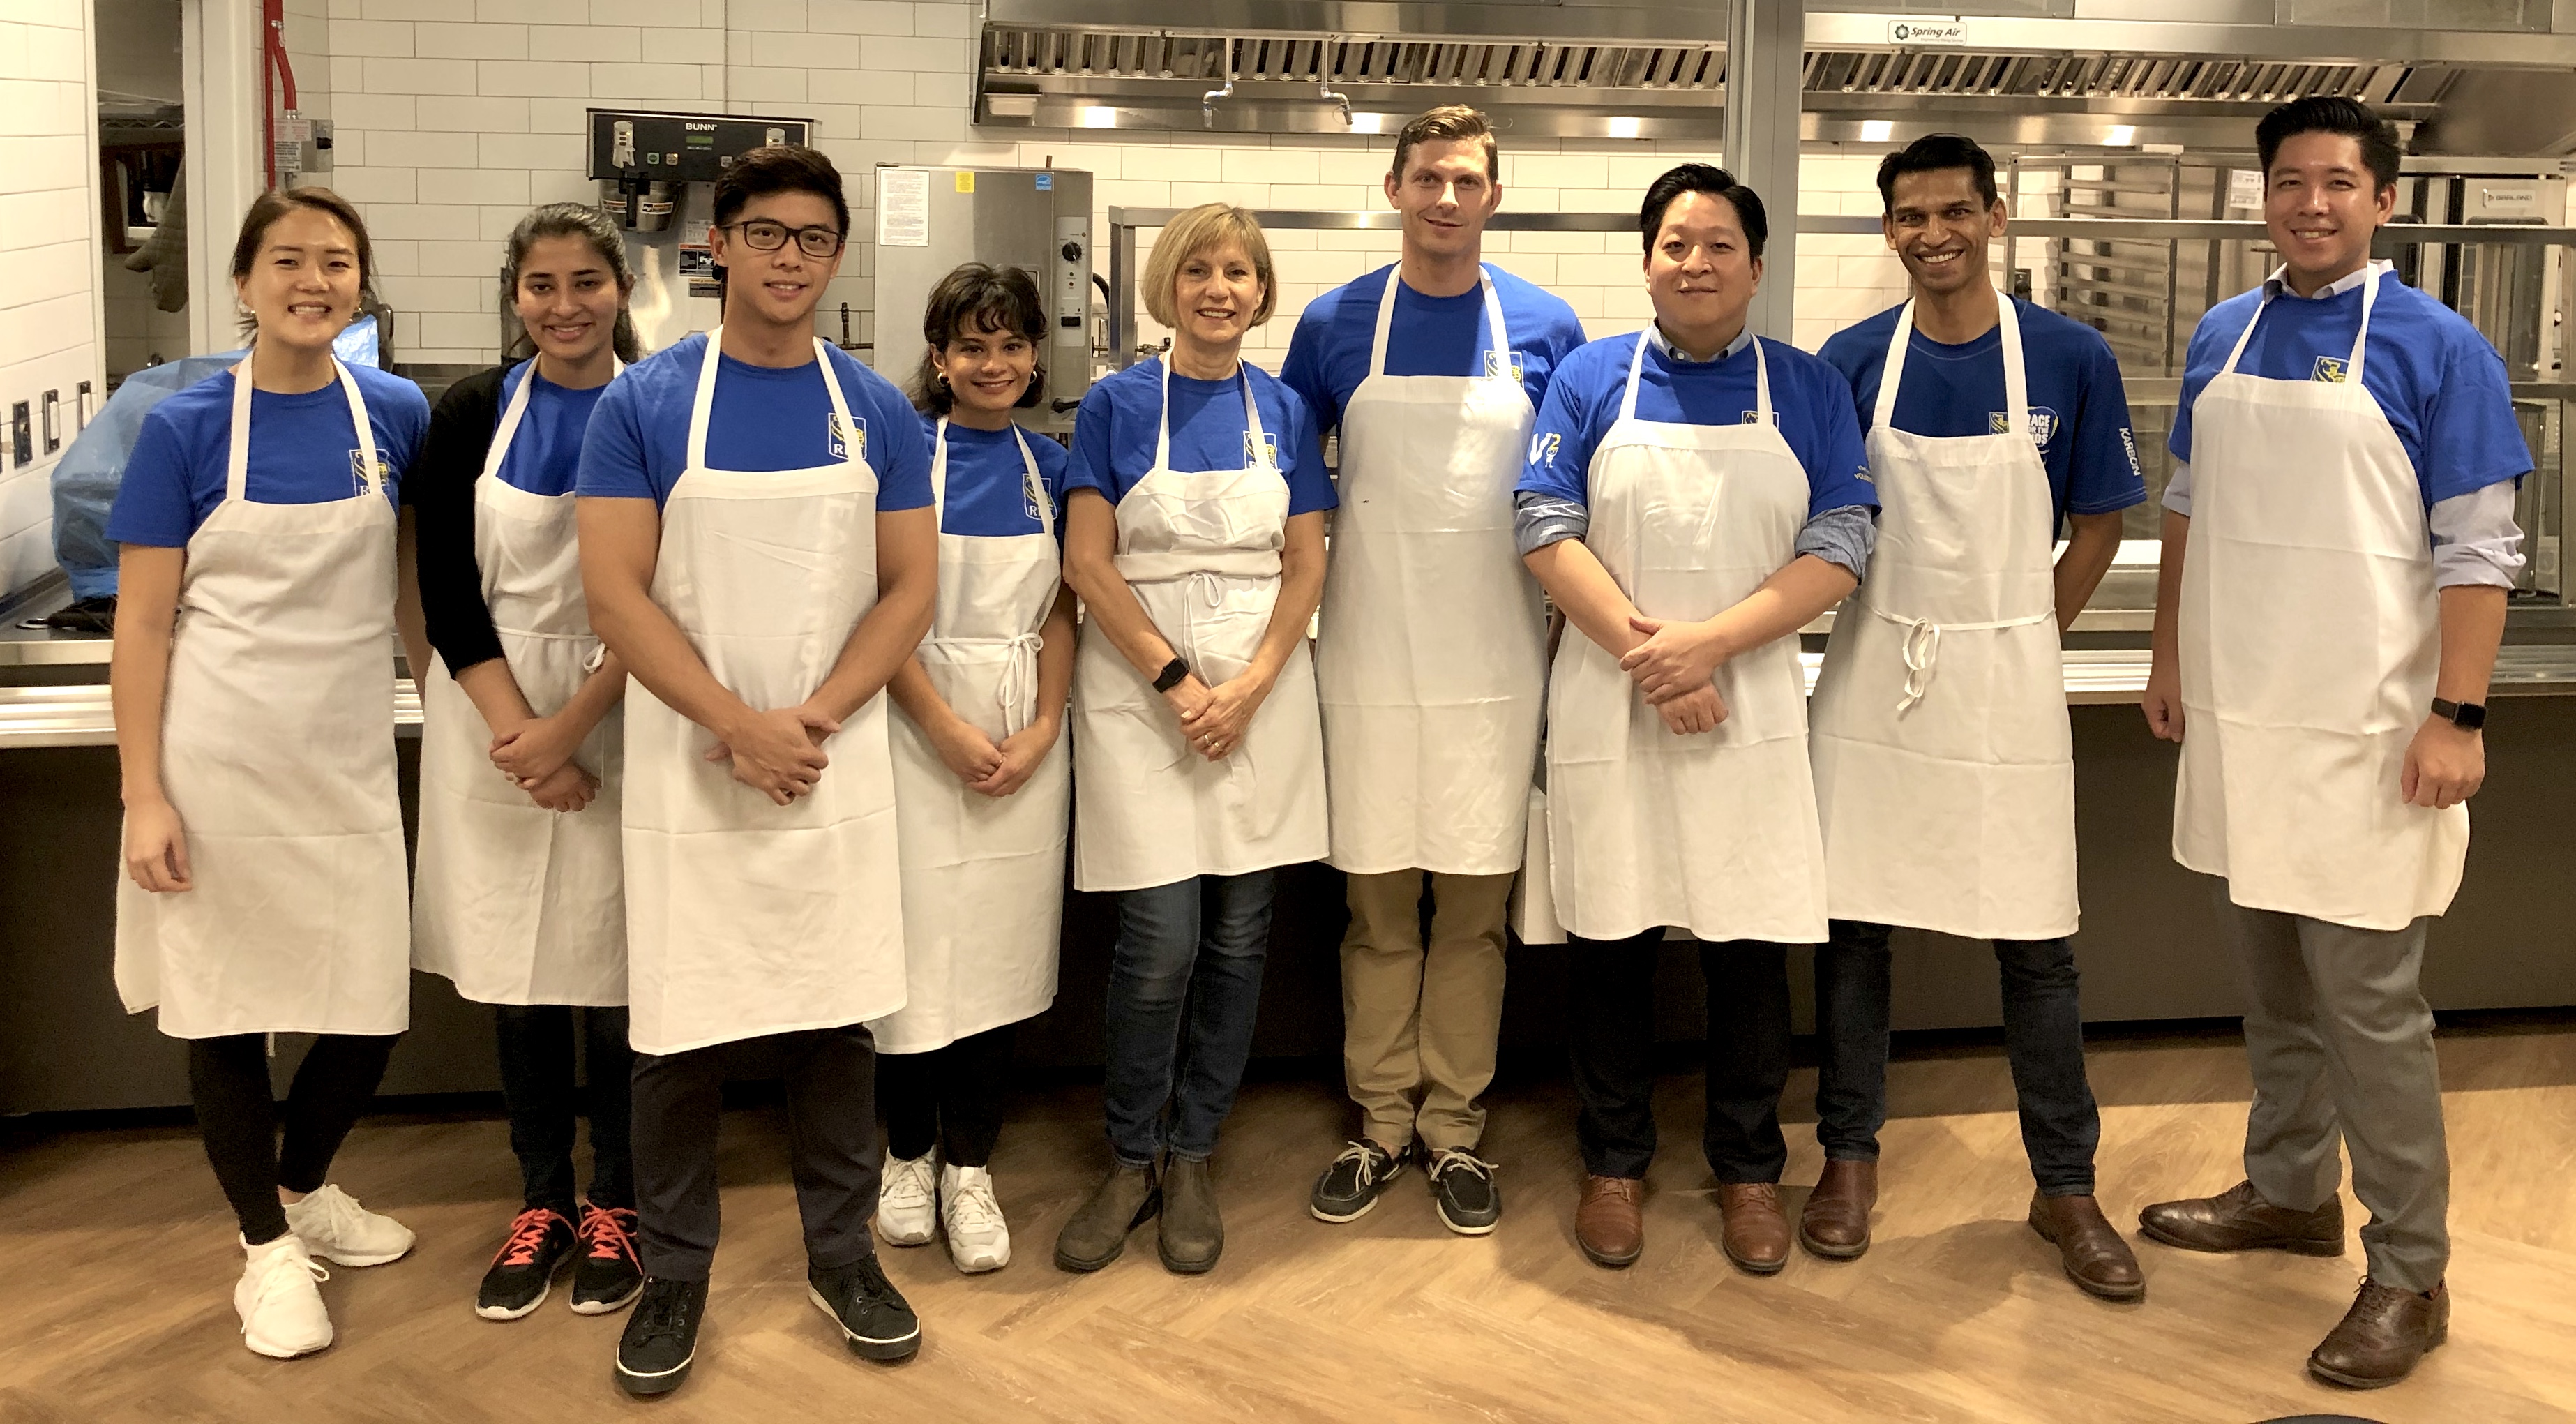 Volunteering with RBC at Lawyers Feed the Hungry - Oct 24th 2019